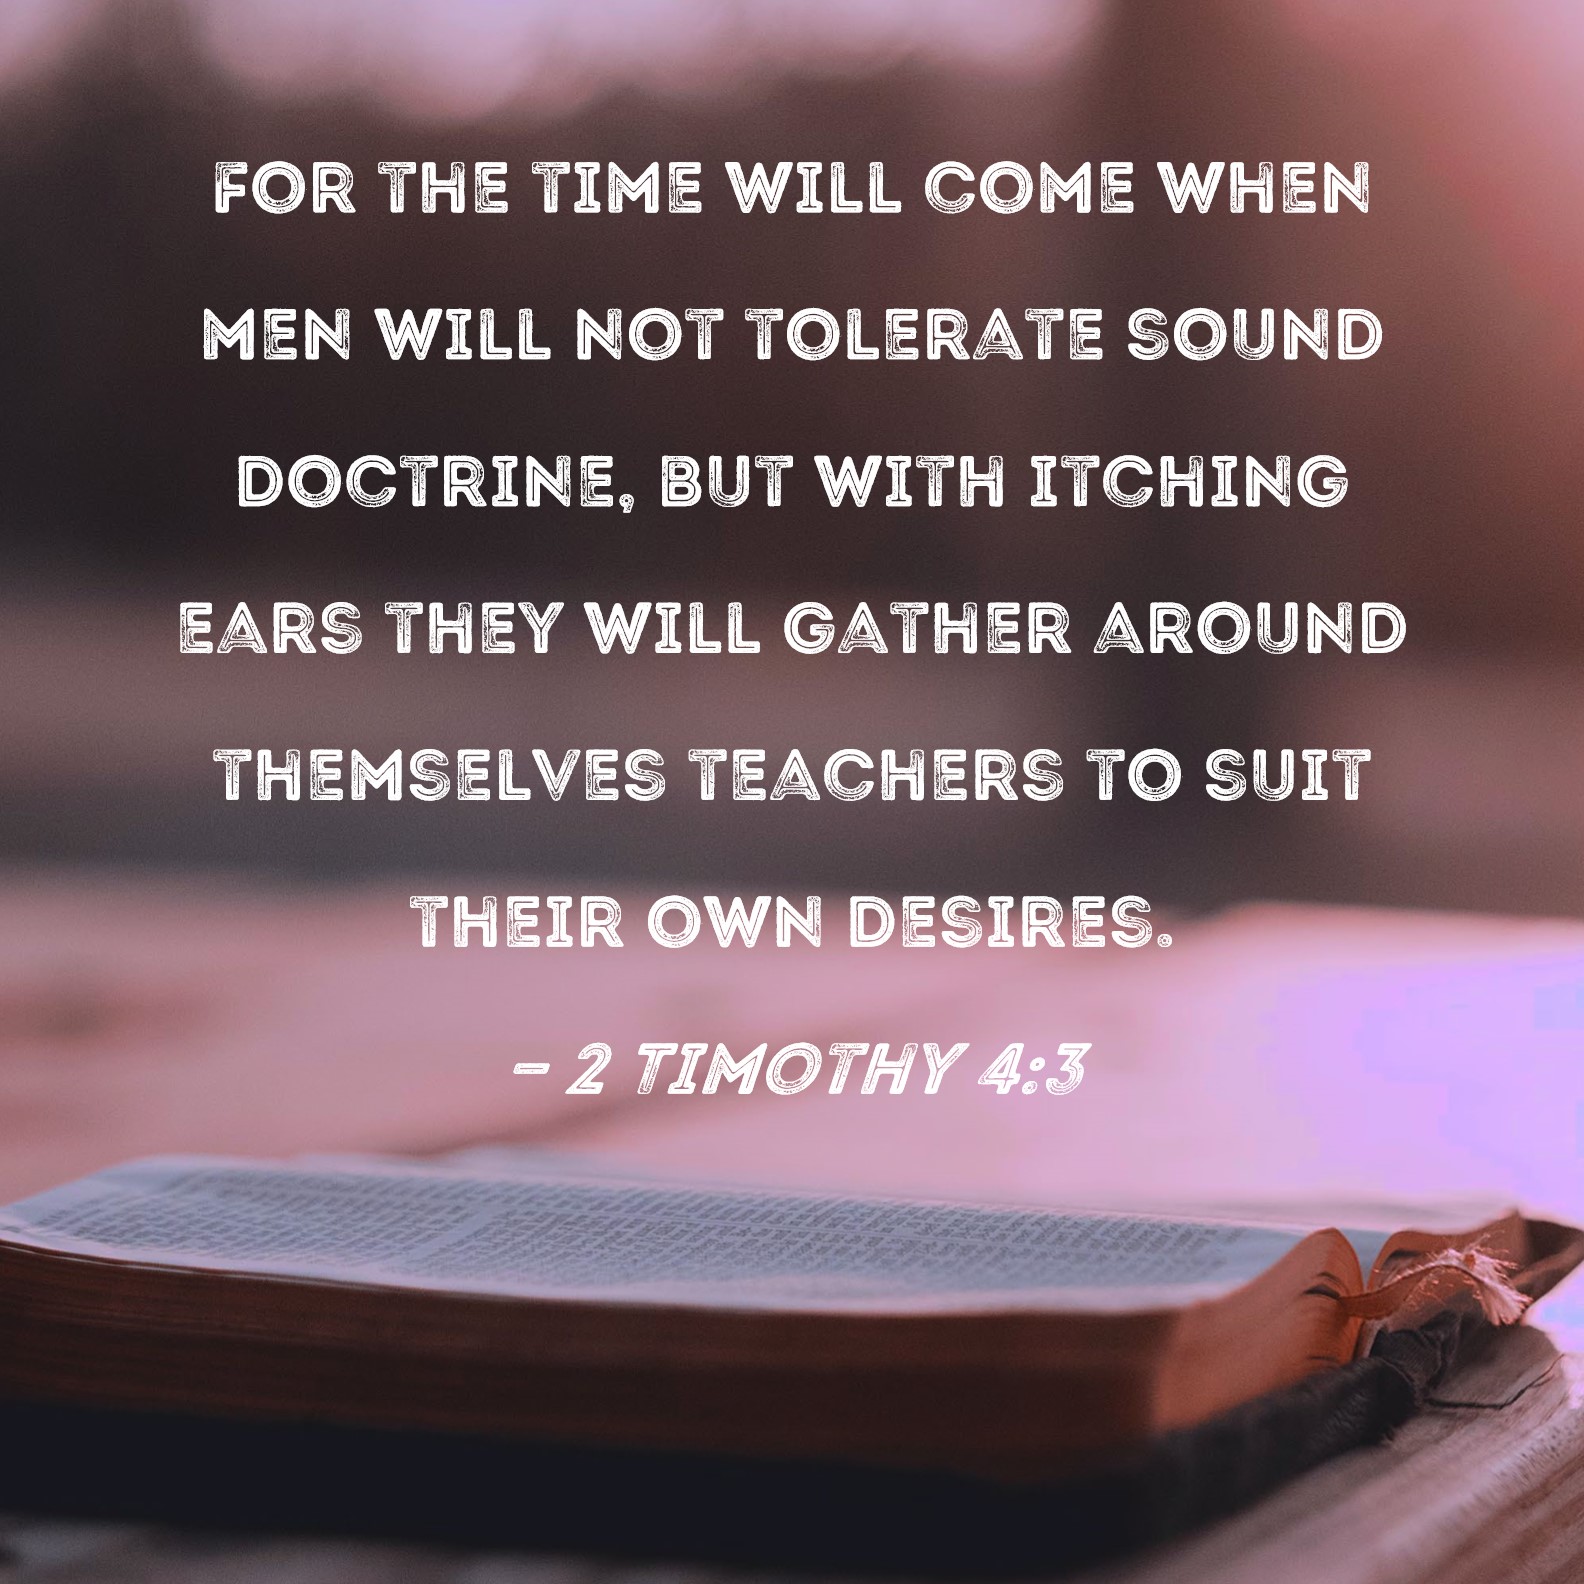 mikro køn whisky 2 Timothy 4:3 For the time will come when men will not tolerate sound  doctrine, but with itching ears they will gather around themselves teachers  to suit their own desires.